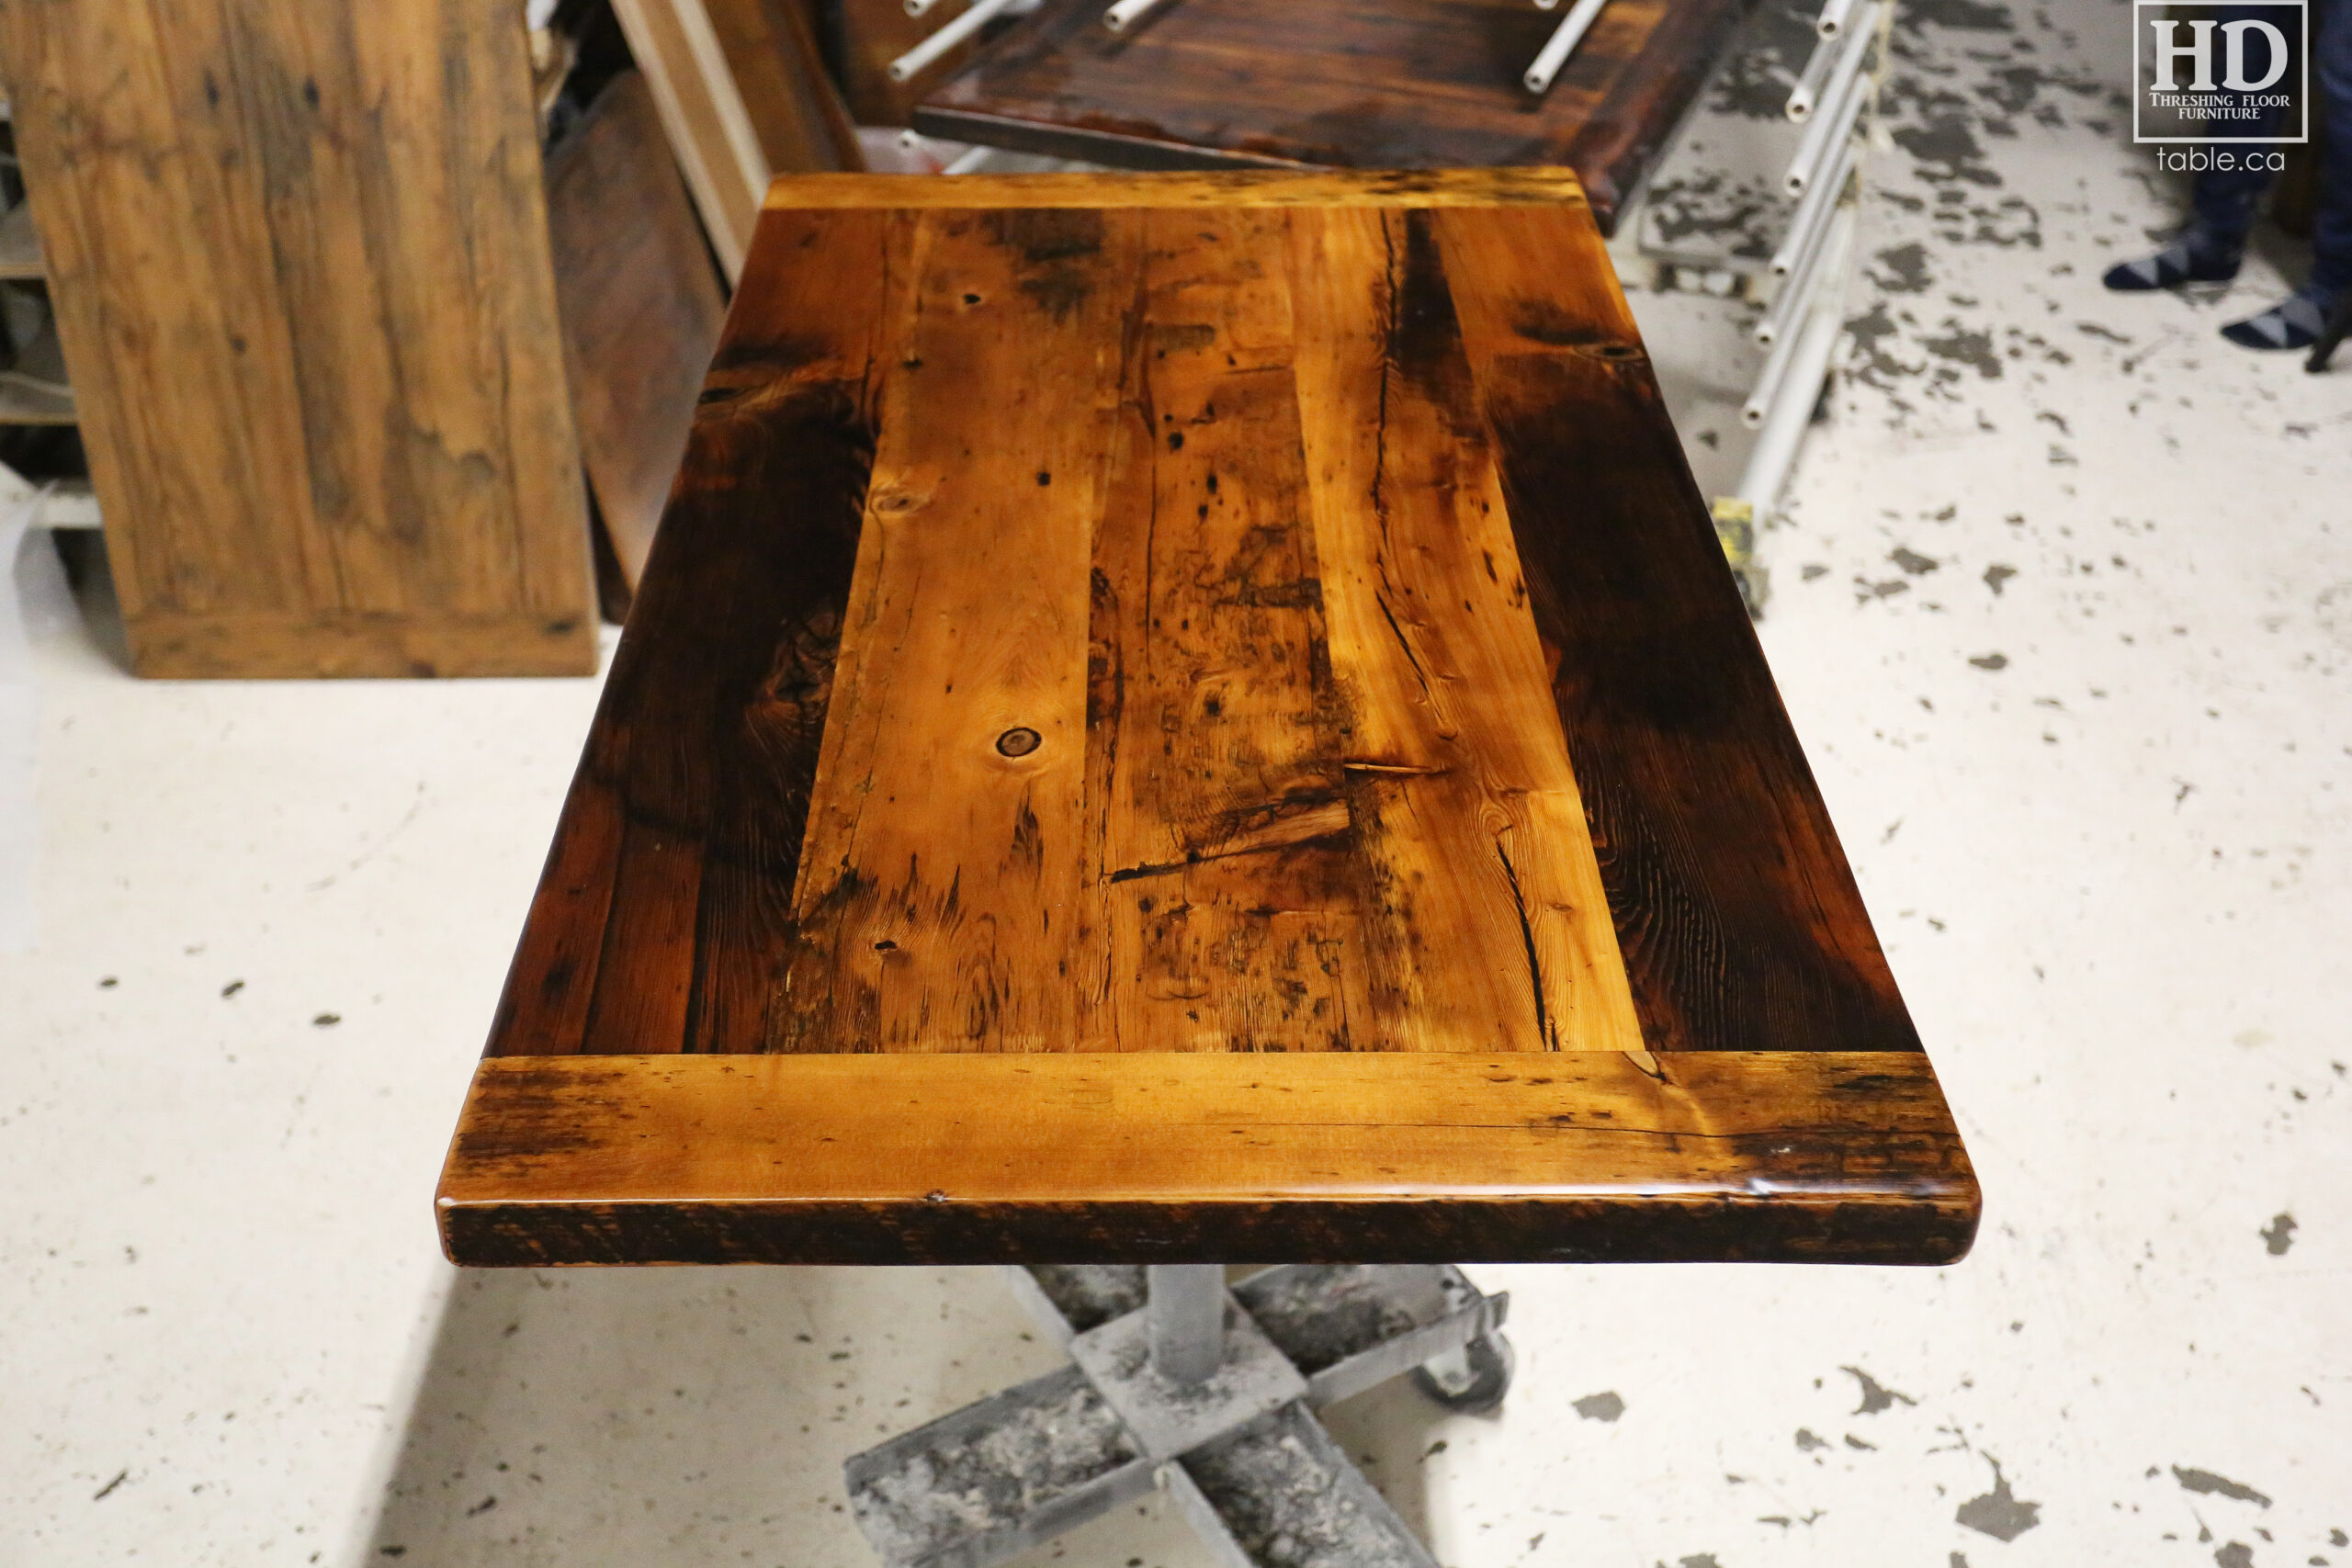 Restaurant Table Tops made from Reclaimed Ontario Barnwood by HD Threshing Floor Furniture / www.table.ca